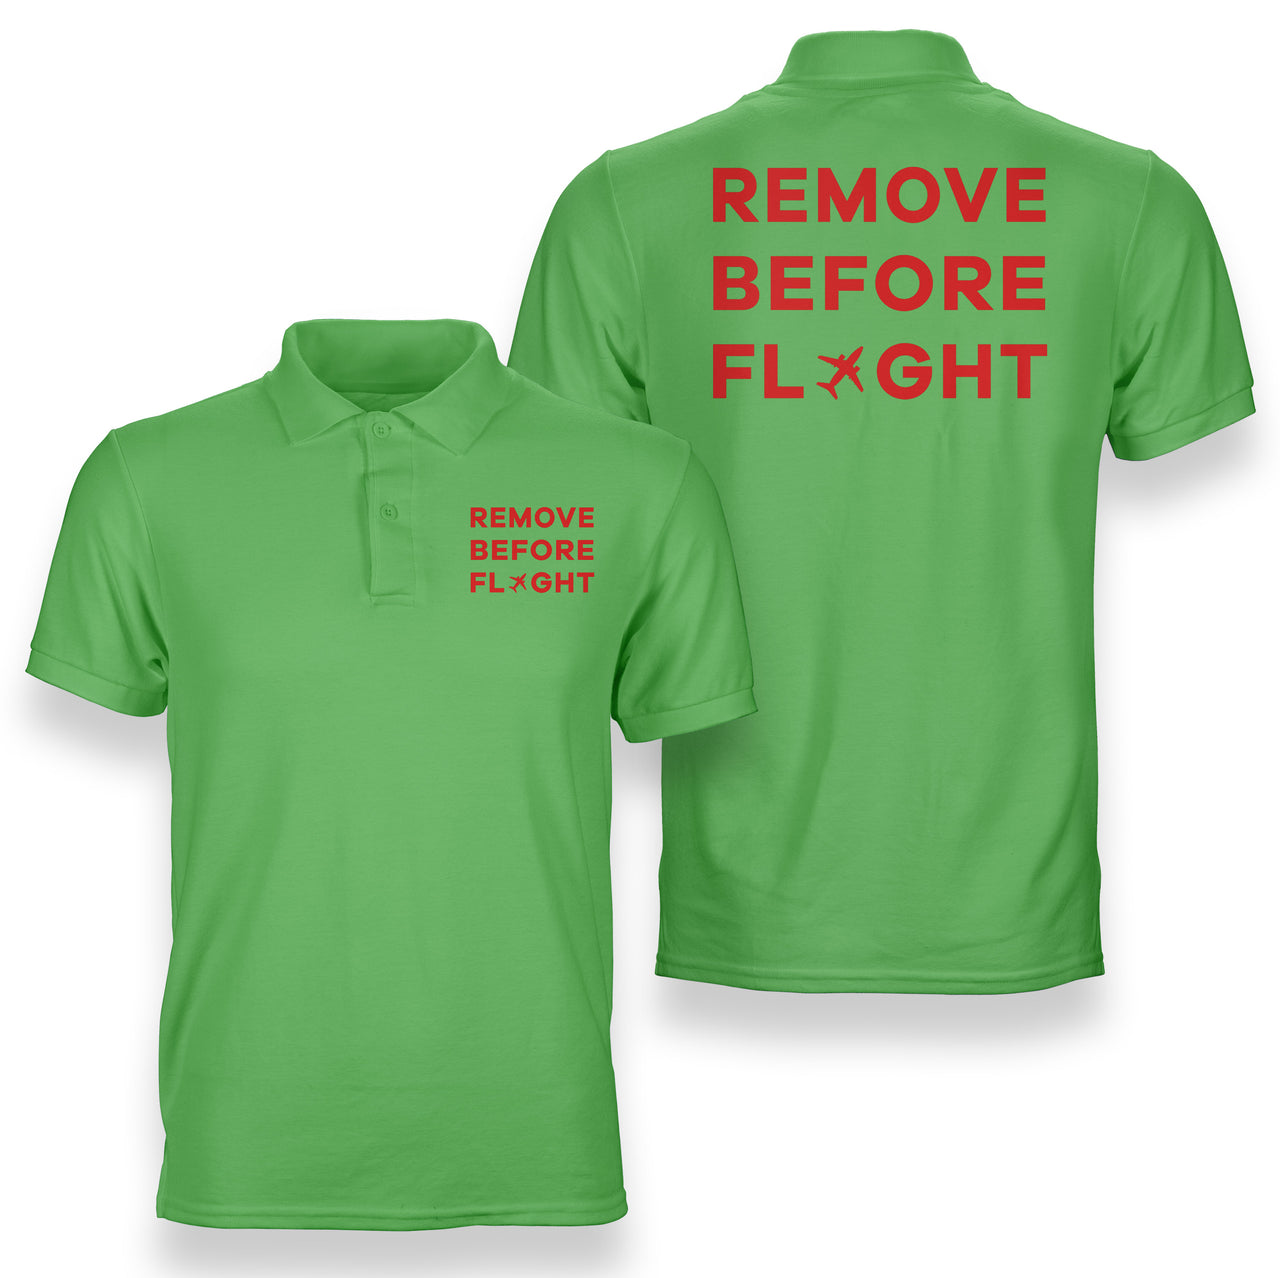 Remove Before Flight Designed Double Side Polo T-Shirts